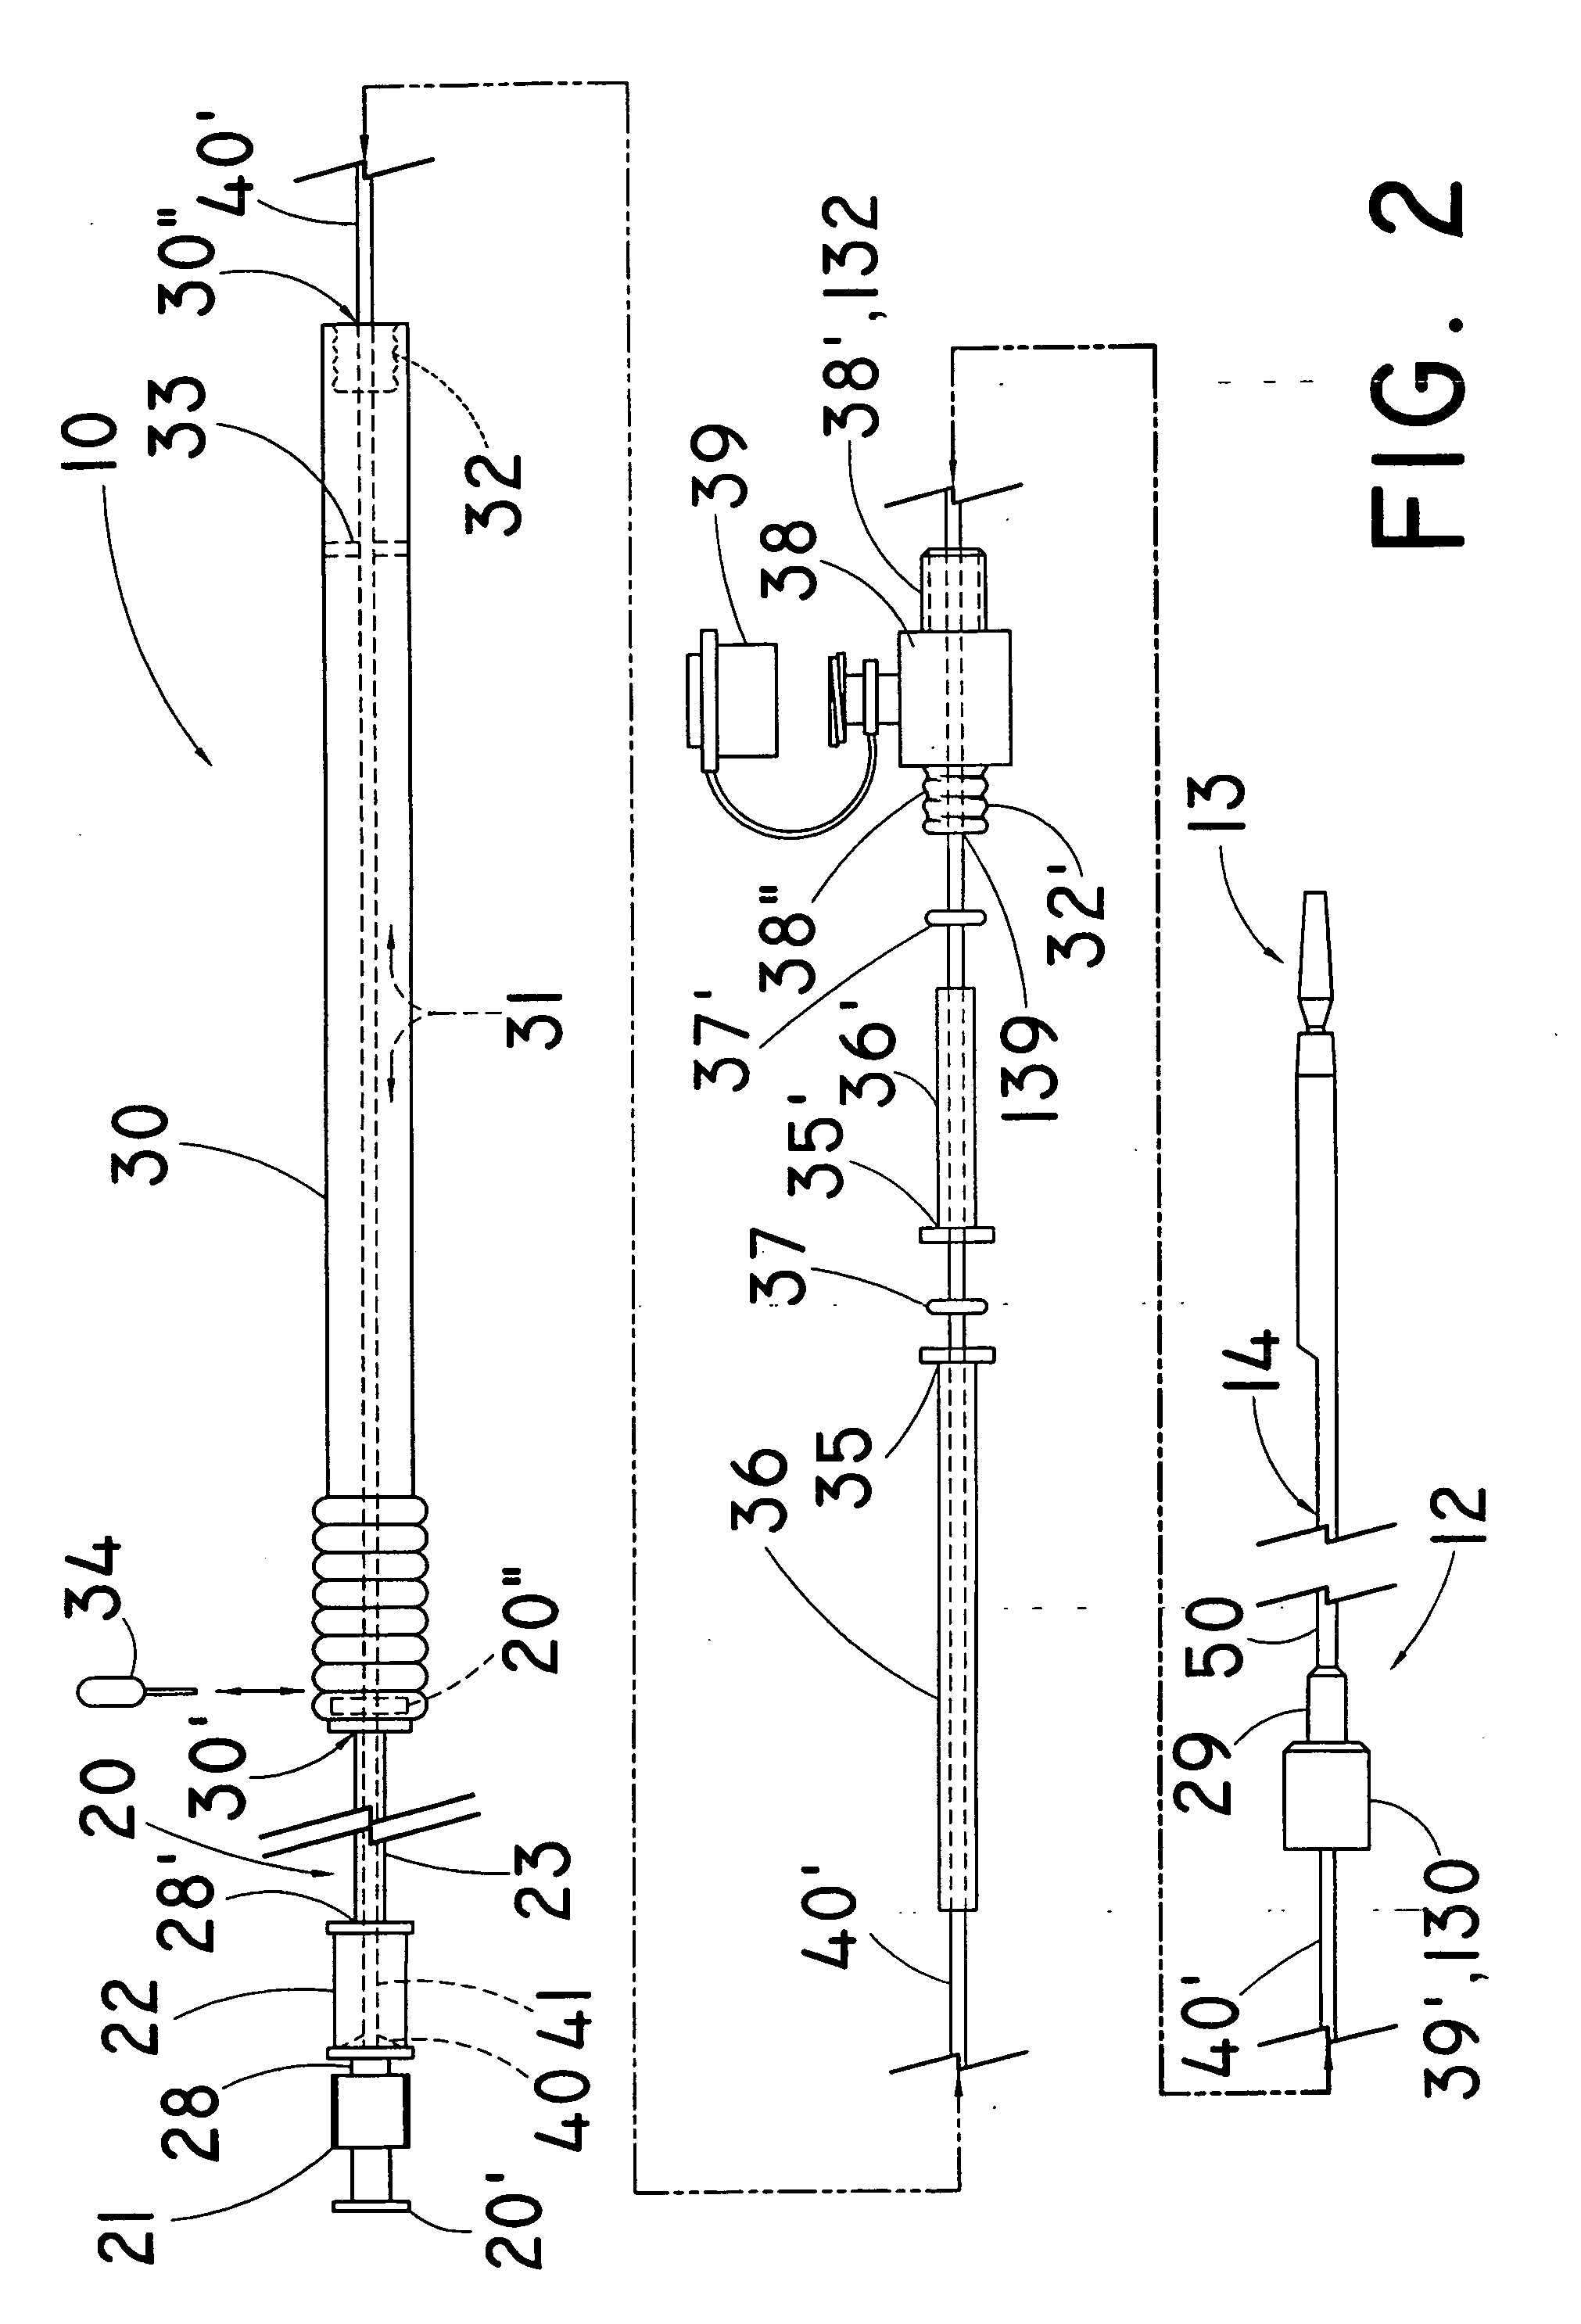 Joint for operatively coupling a contoured inner compression member and an inner guide channel member for medical device delivery systems